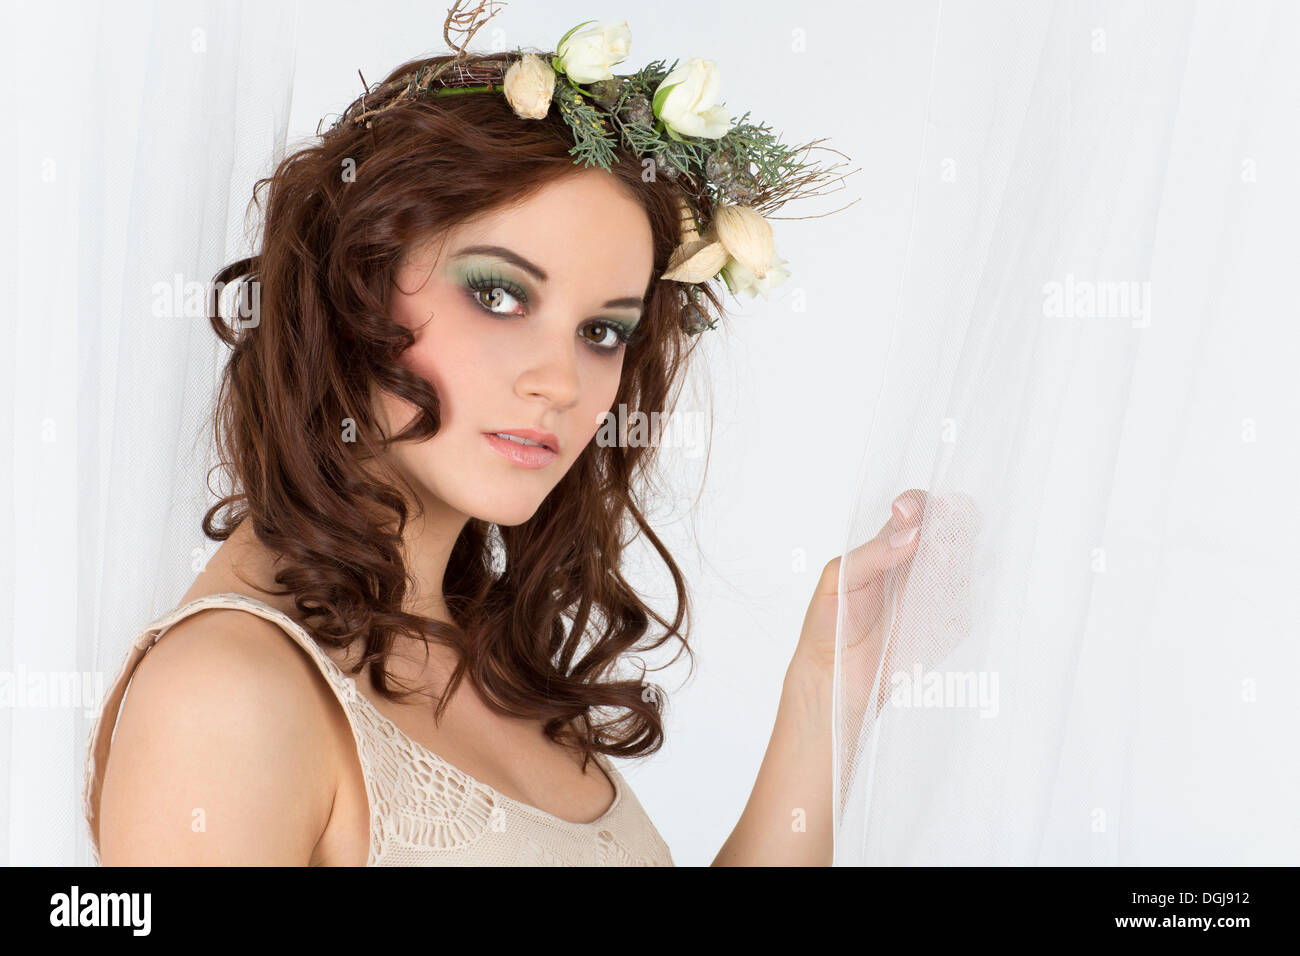 Young woman with a flower arrangement as a headdress Stock Photo